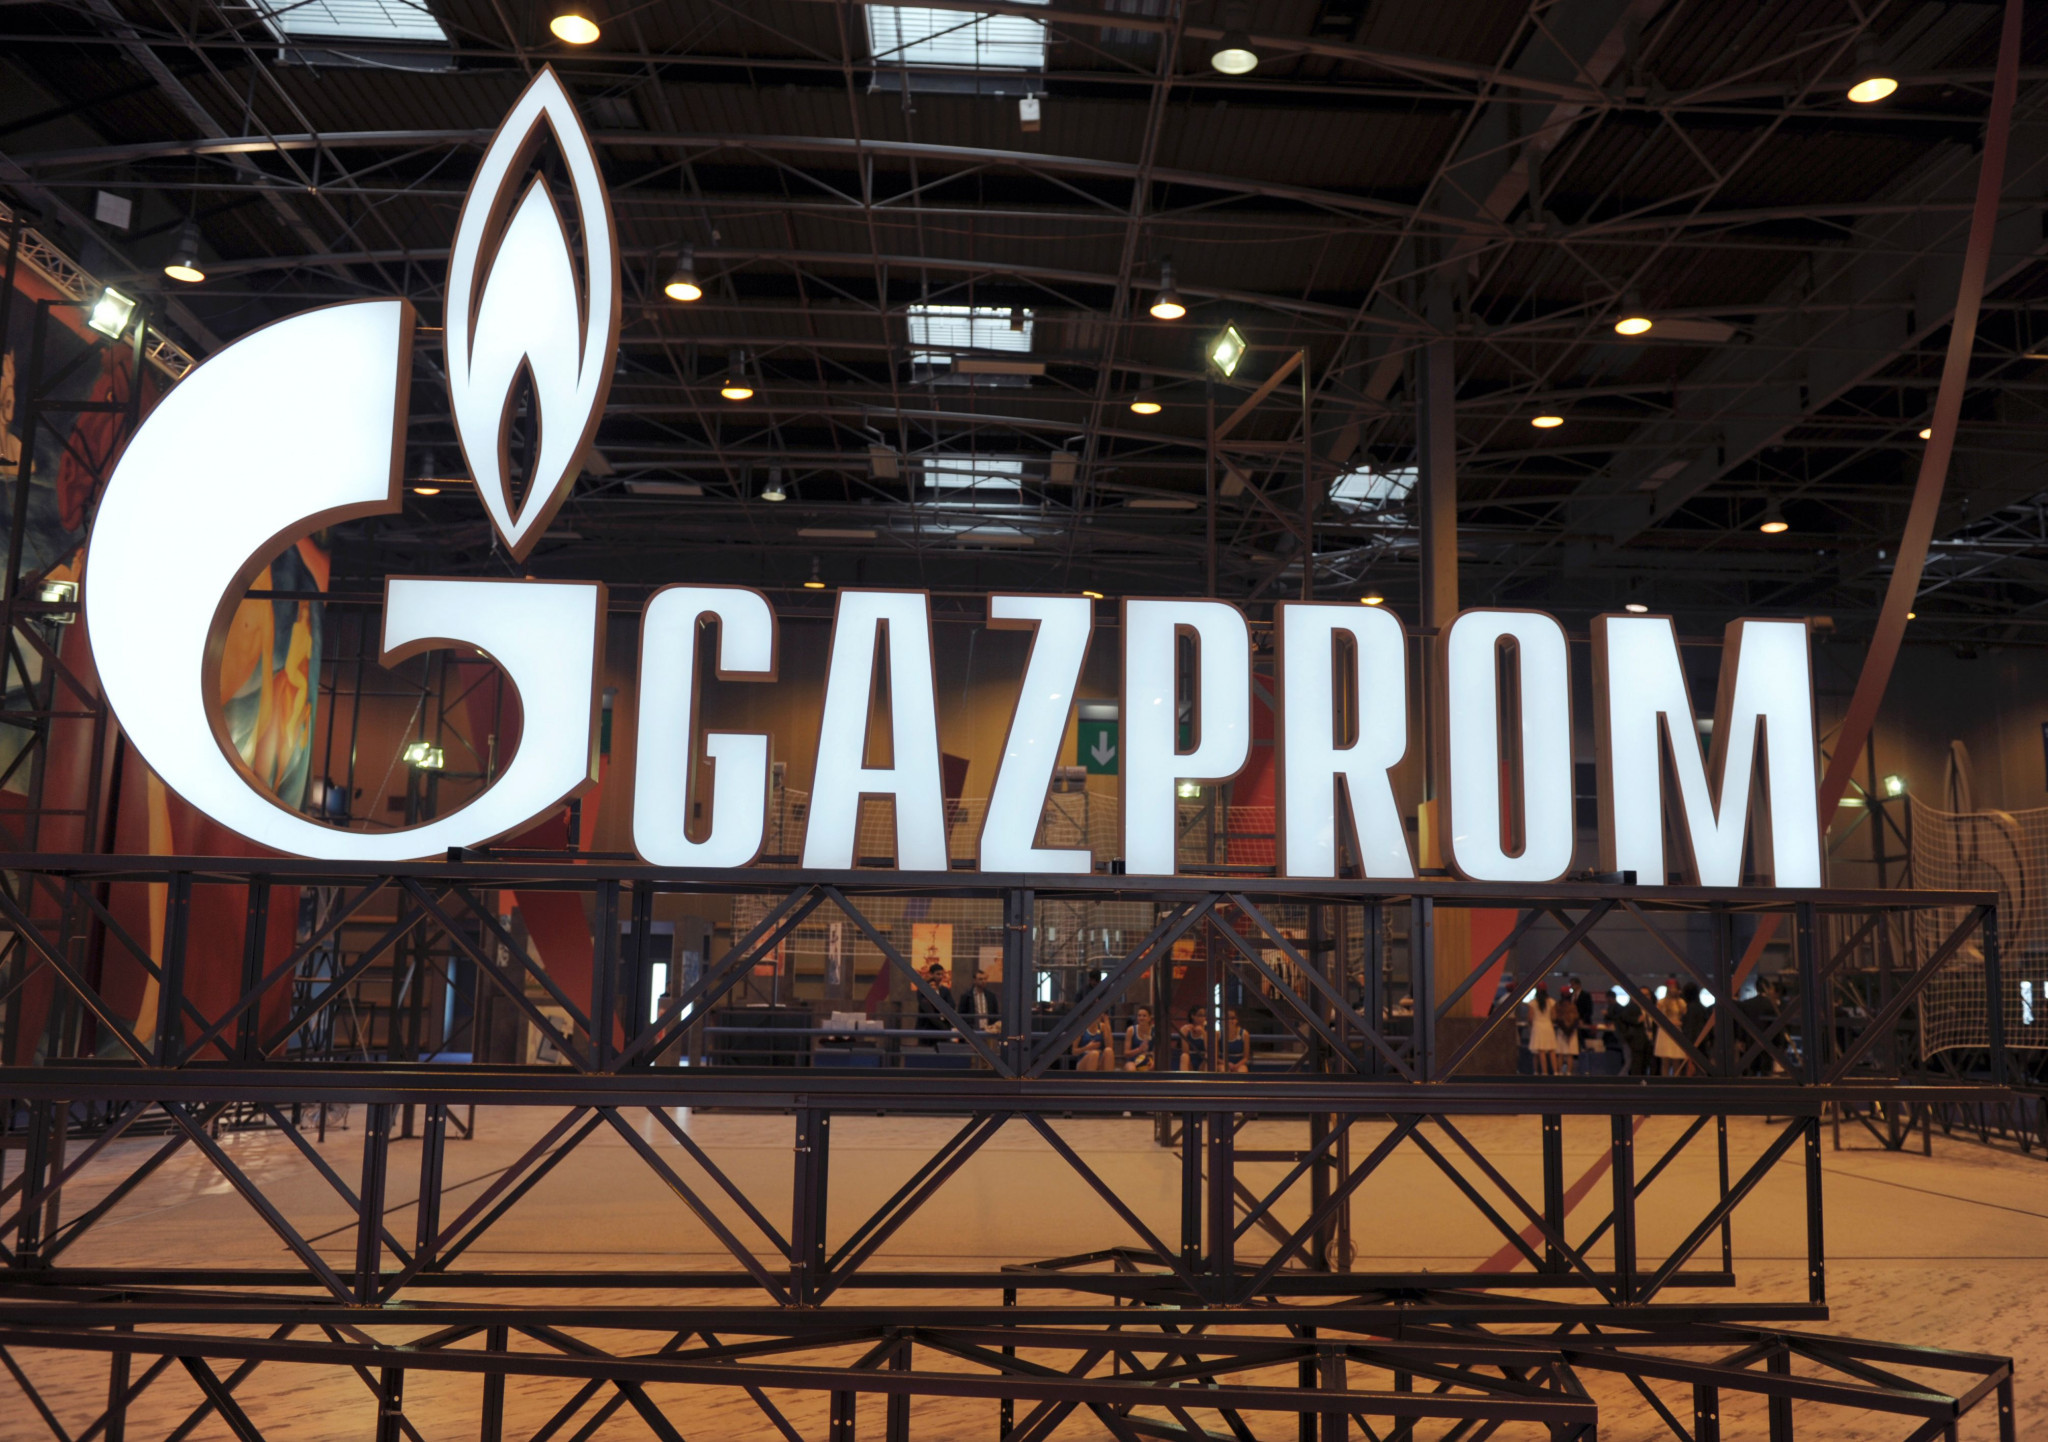 Analysis by insidethegames suggests that Gazprom may have pumped as much as CHF30 million into the boxing body ©Getty Images

